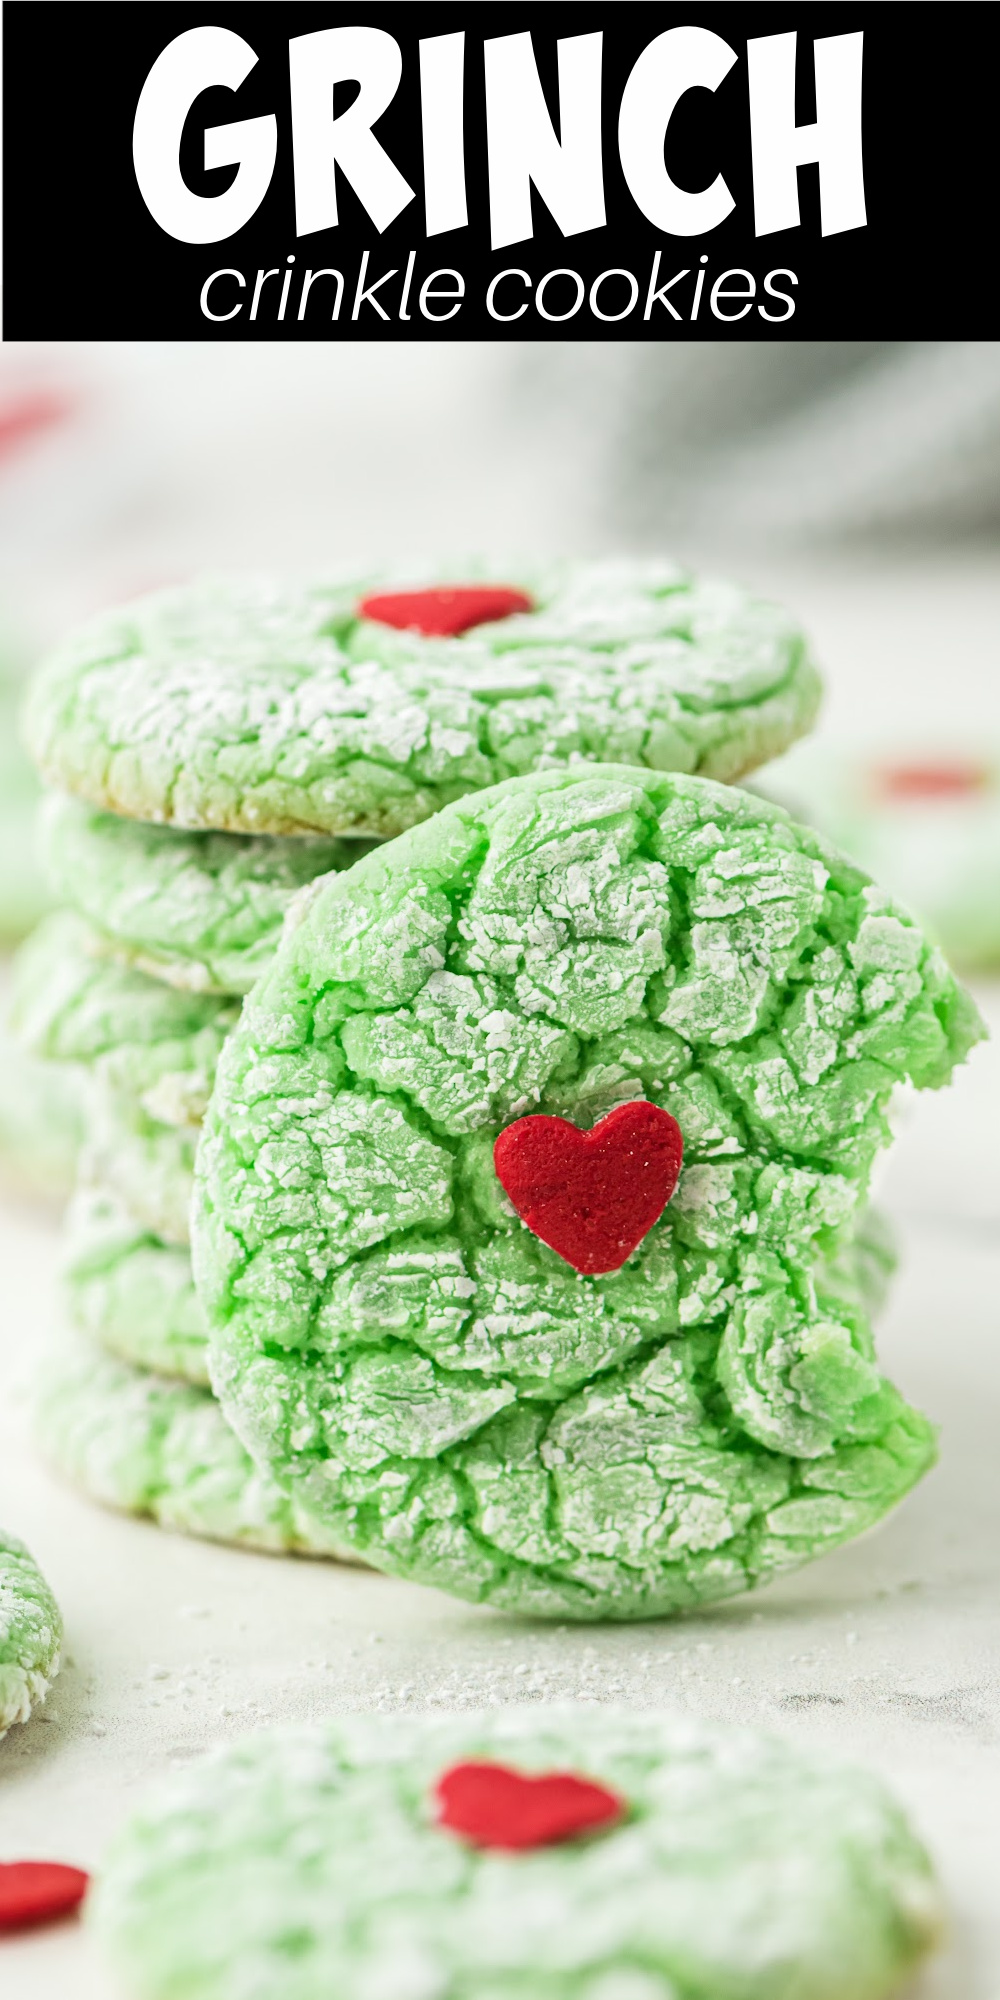 Grinch crinkle cookies are an easy cake mix cookie that's soft and delicious! These fun treats have a huge red sprinkle in the center of the soft cookie that kids and adults love.